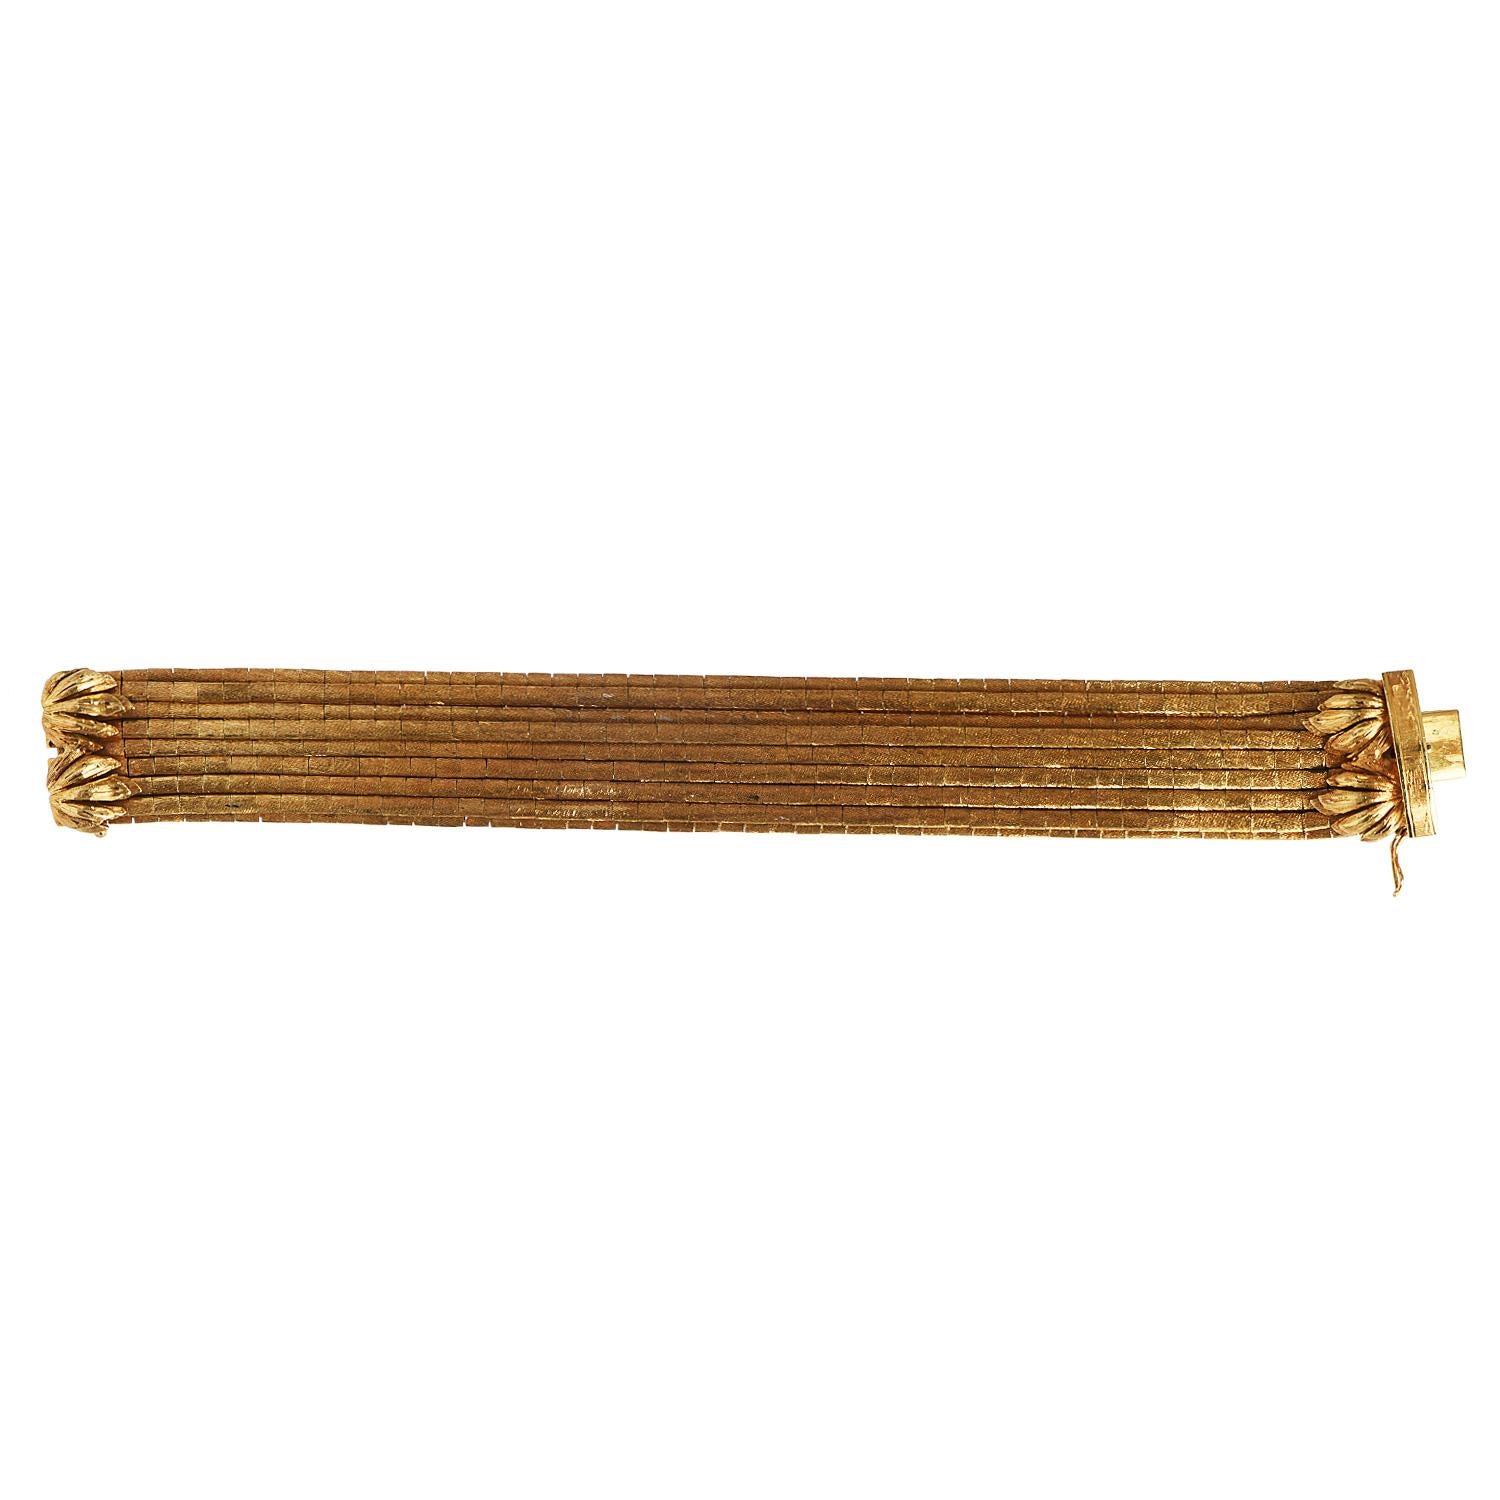 This incredibly sophisticated and versatile 1960s Vintage bracelet with barrel bamboo style link is crafted in 18K yellow gold.

weighting in total 109.4 Grams.  It is composed of fifteen strands of gold.

Measuring appx. 7.25